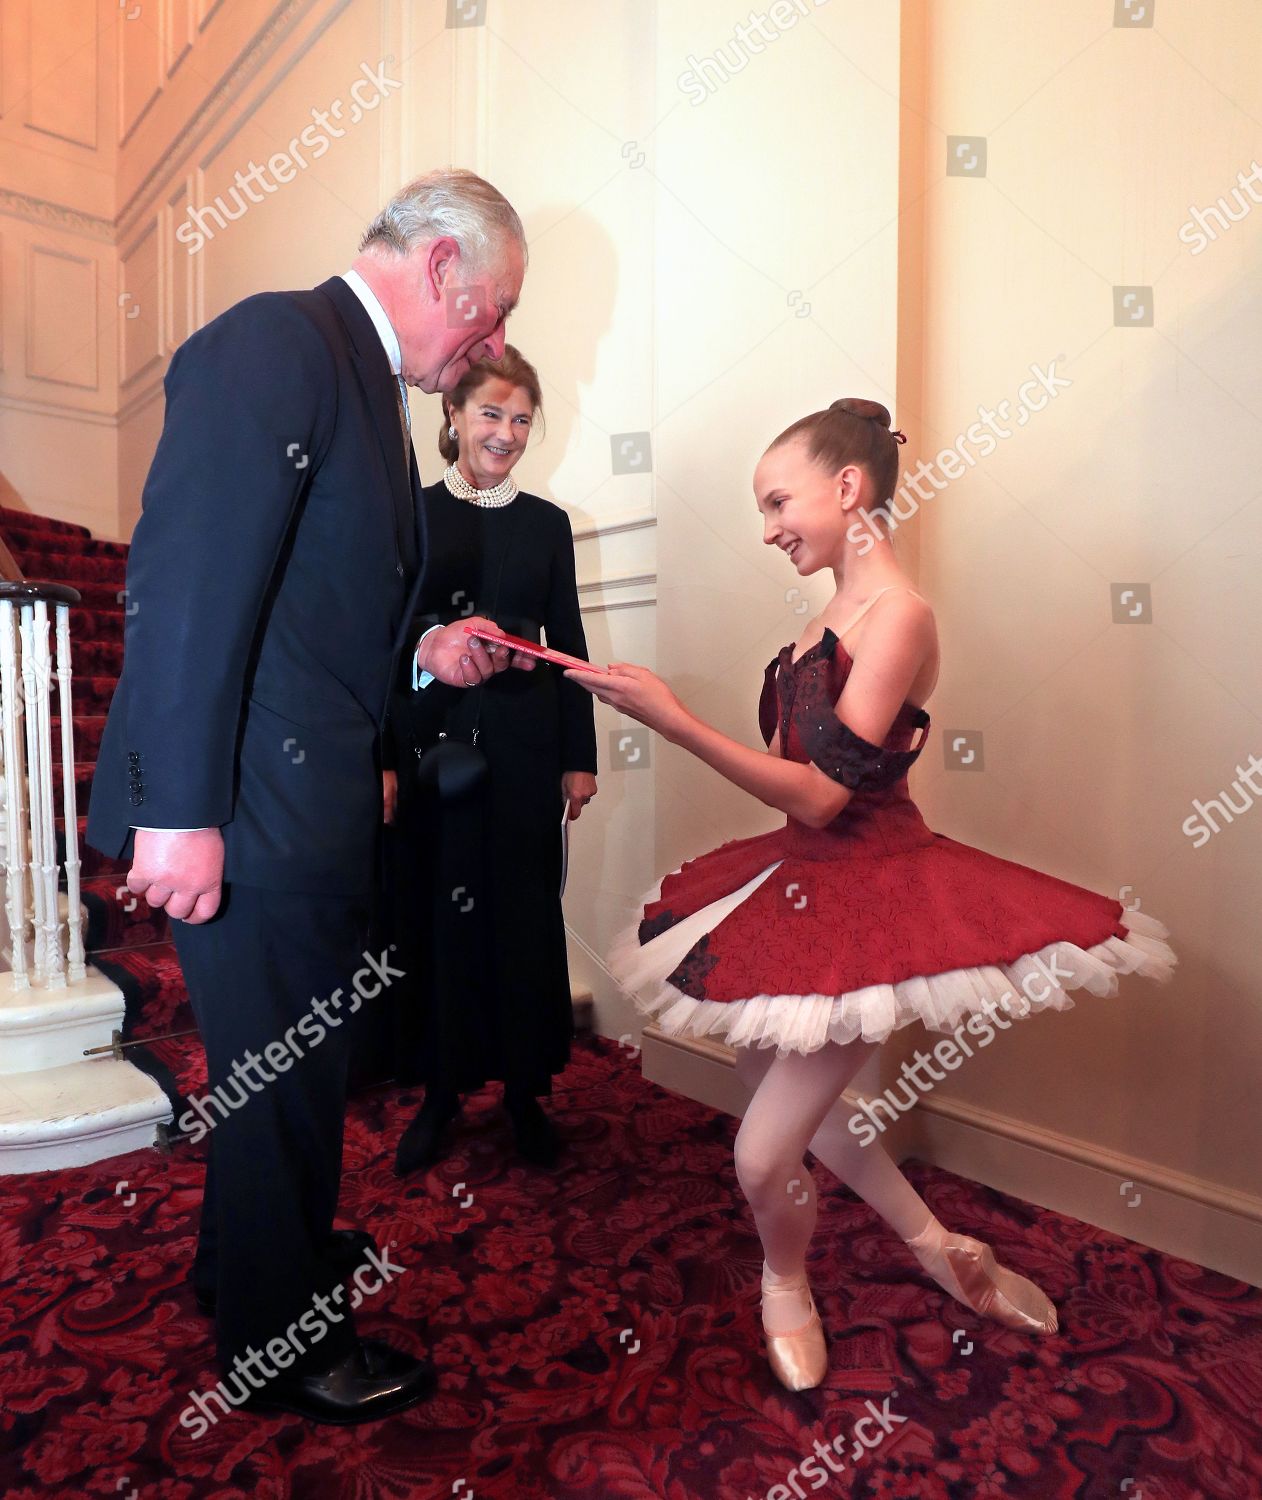 prince-charles-visit-to-the-royal-opera-house-london-uk-shutterstock-editorial-10103197a.jpg